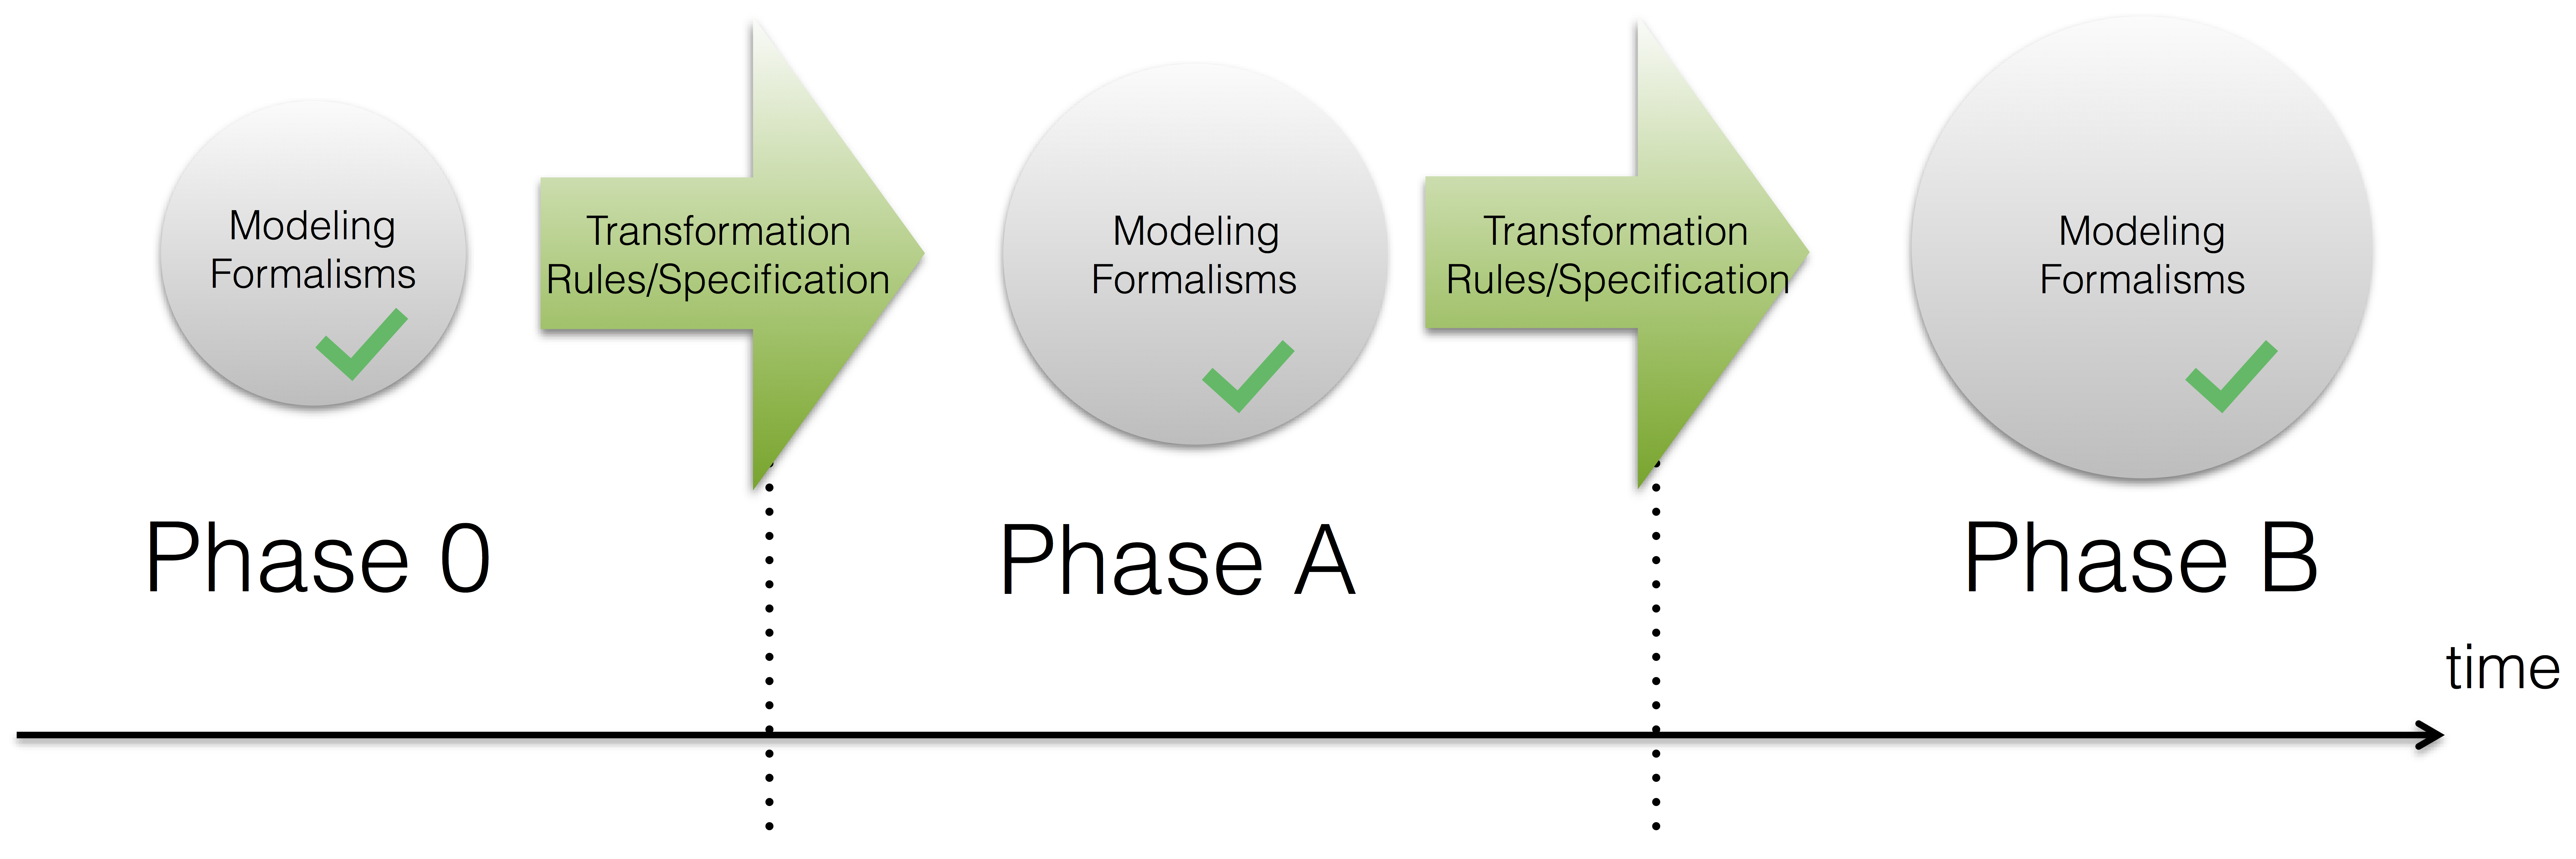 Multi-phase model-based spacecraft design process with growing amount of information and transformation rules for transitions between the phases